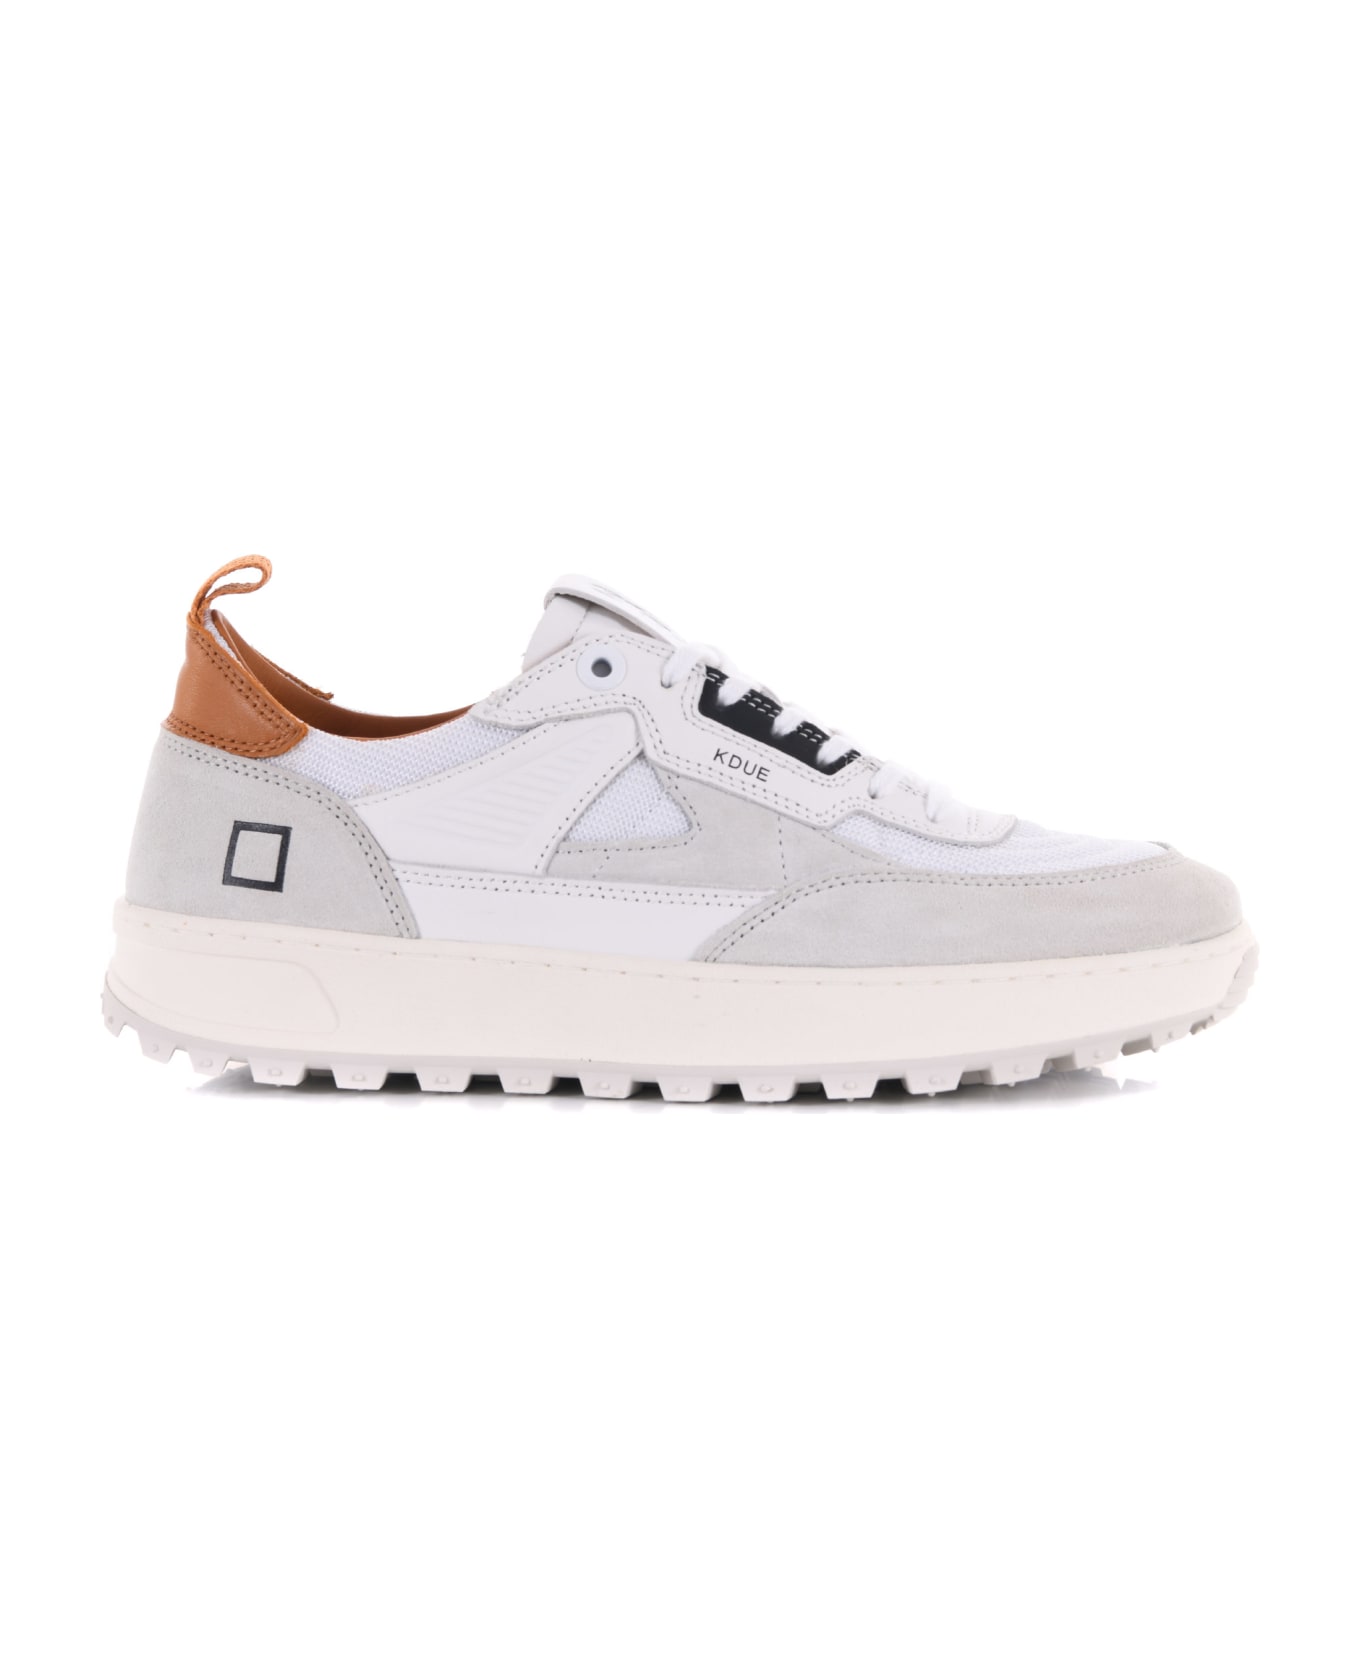 D.A.T.E. Sneakers "kdue Colored" In Suede And Nylon Mesh - Bianco/arancio スニーカー